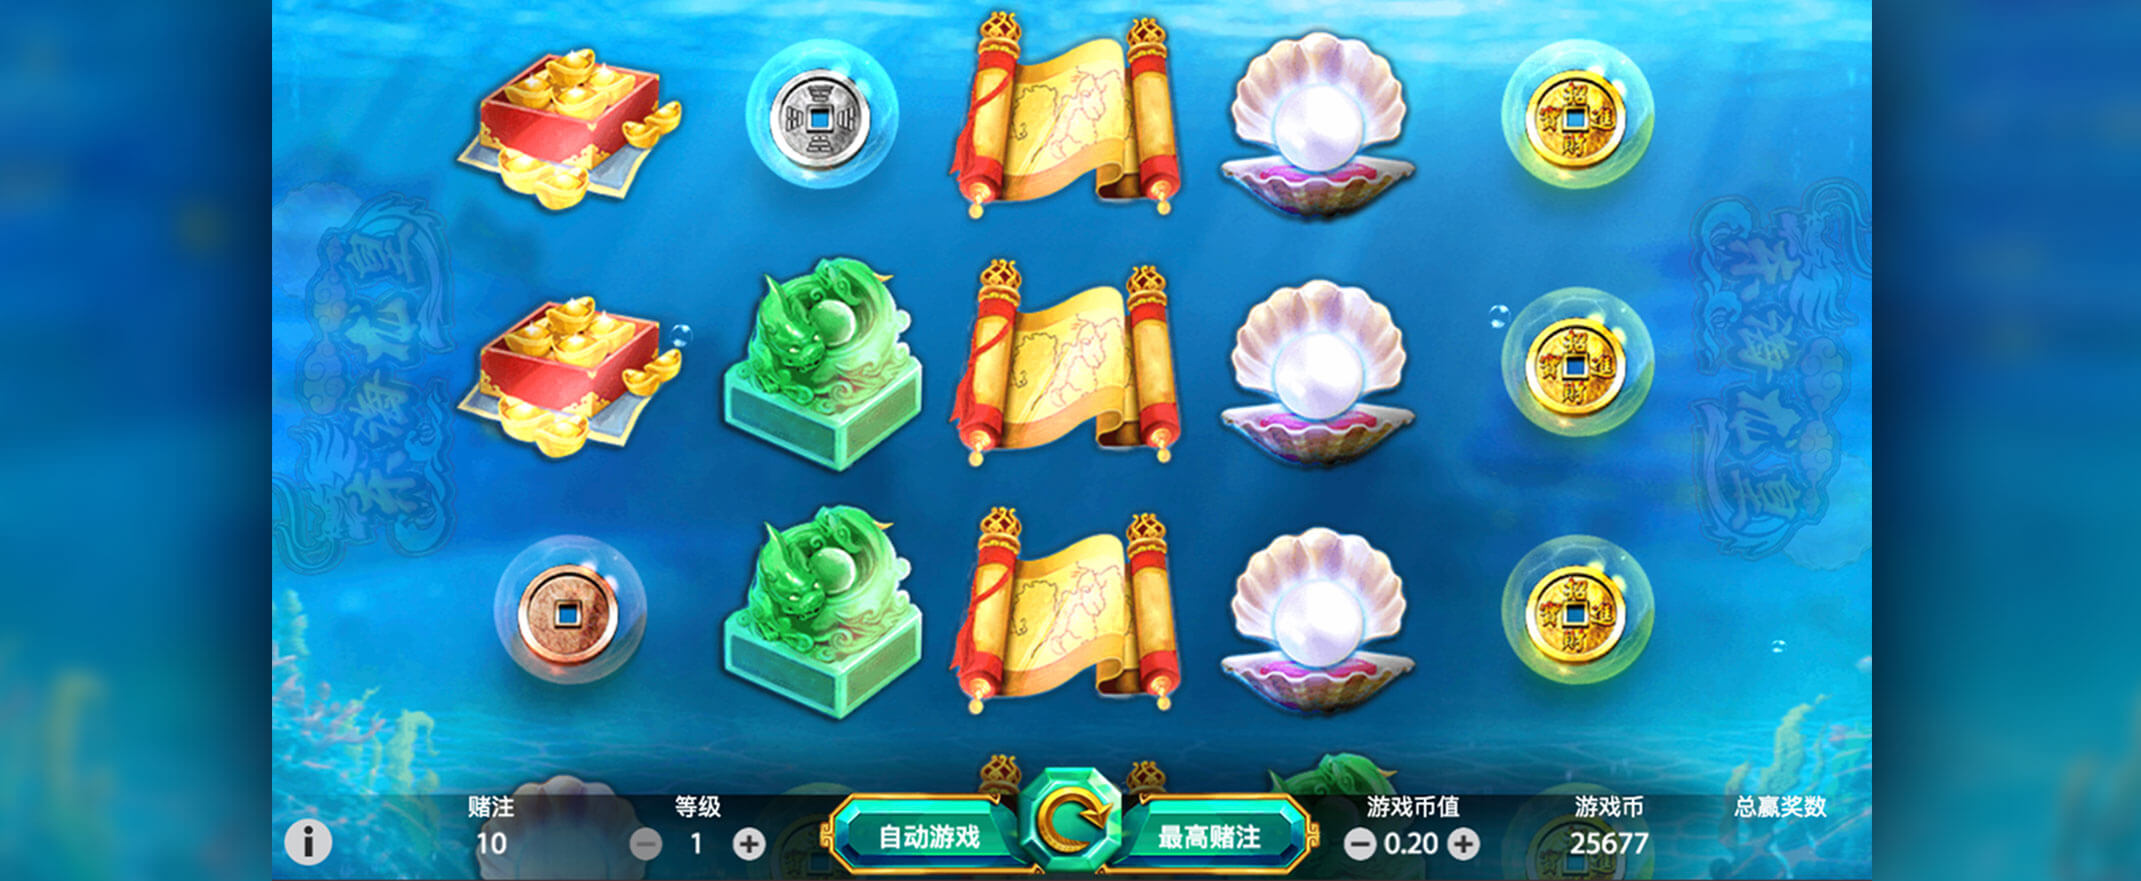 East Sea Dragon King slot review - image of the reels and symbols